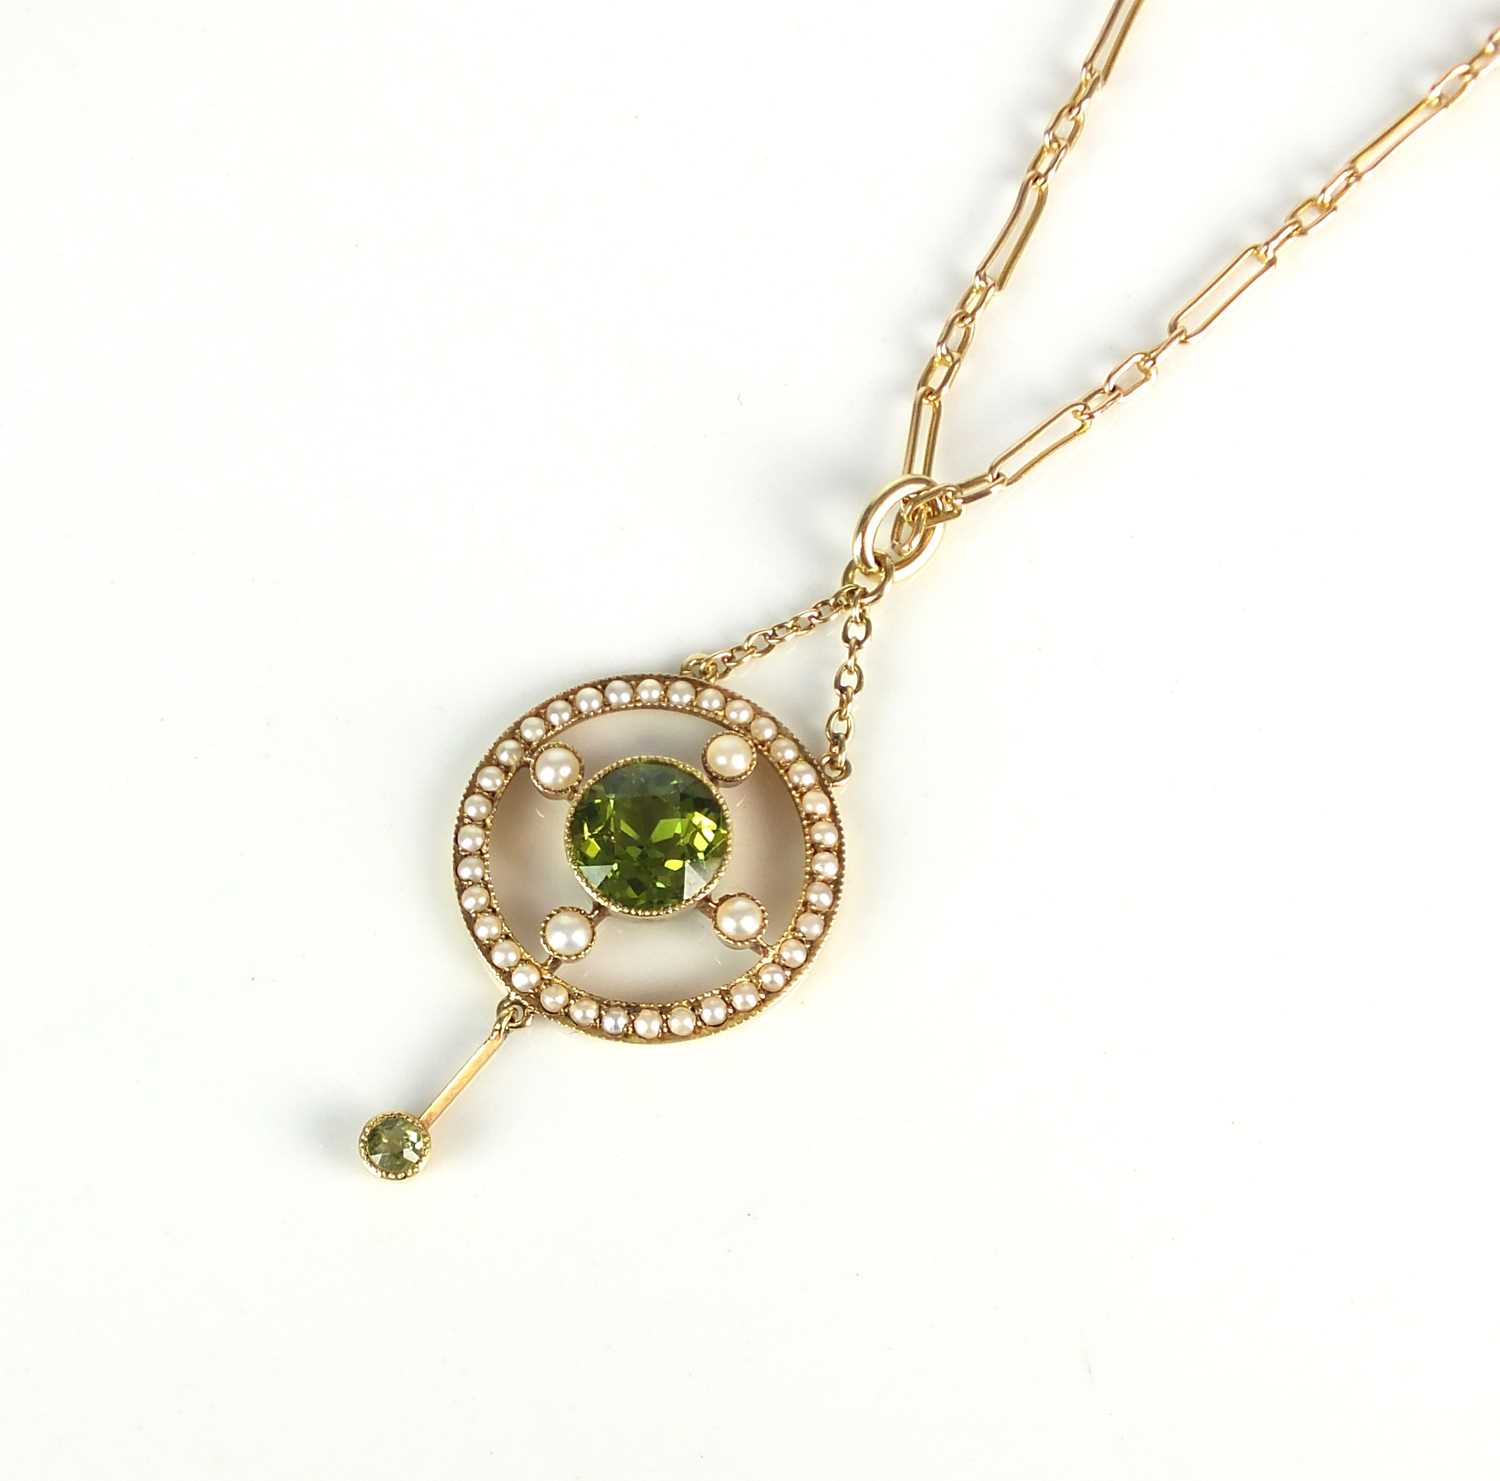 Lot 19 - An early 20th century peridot and seed pearl pendant on chain